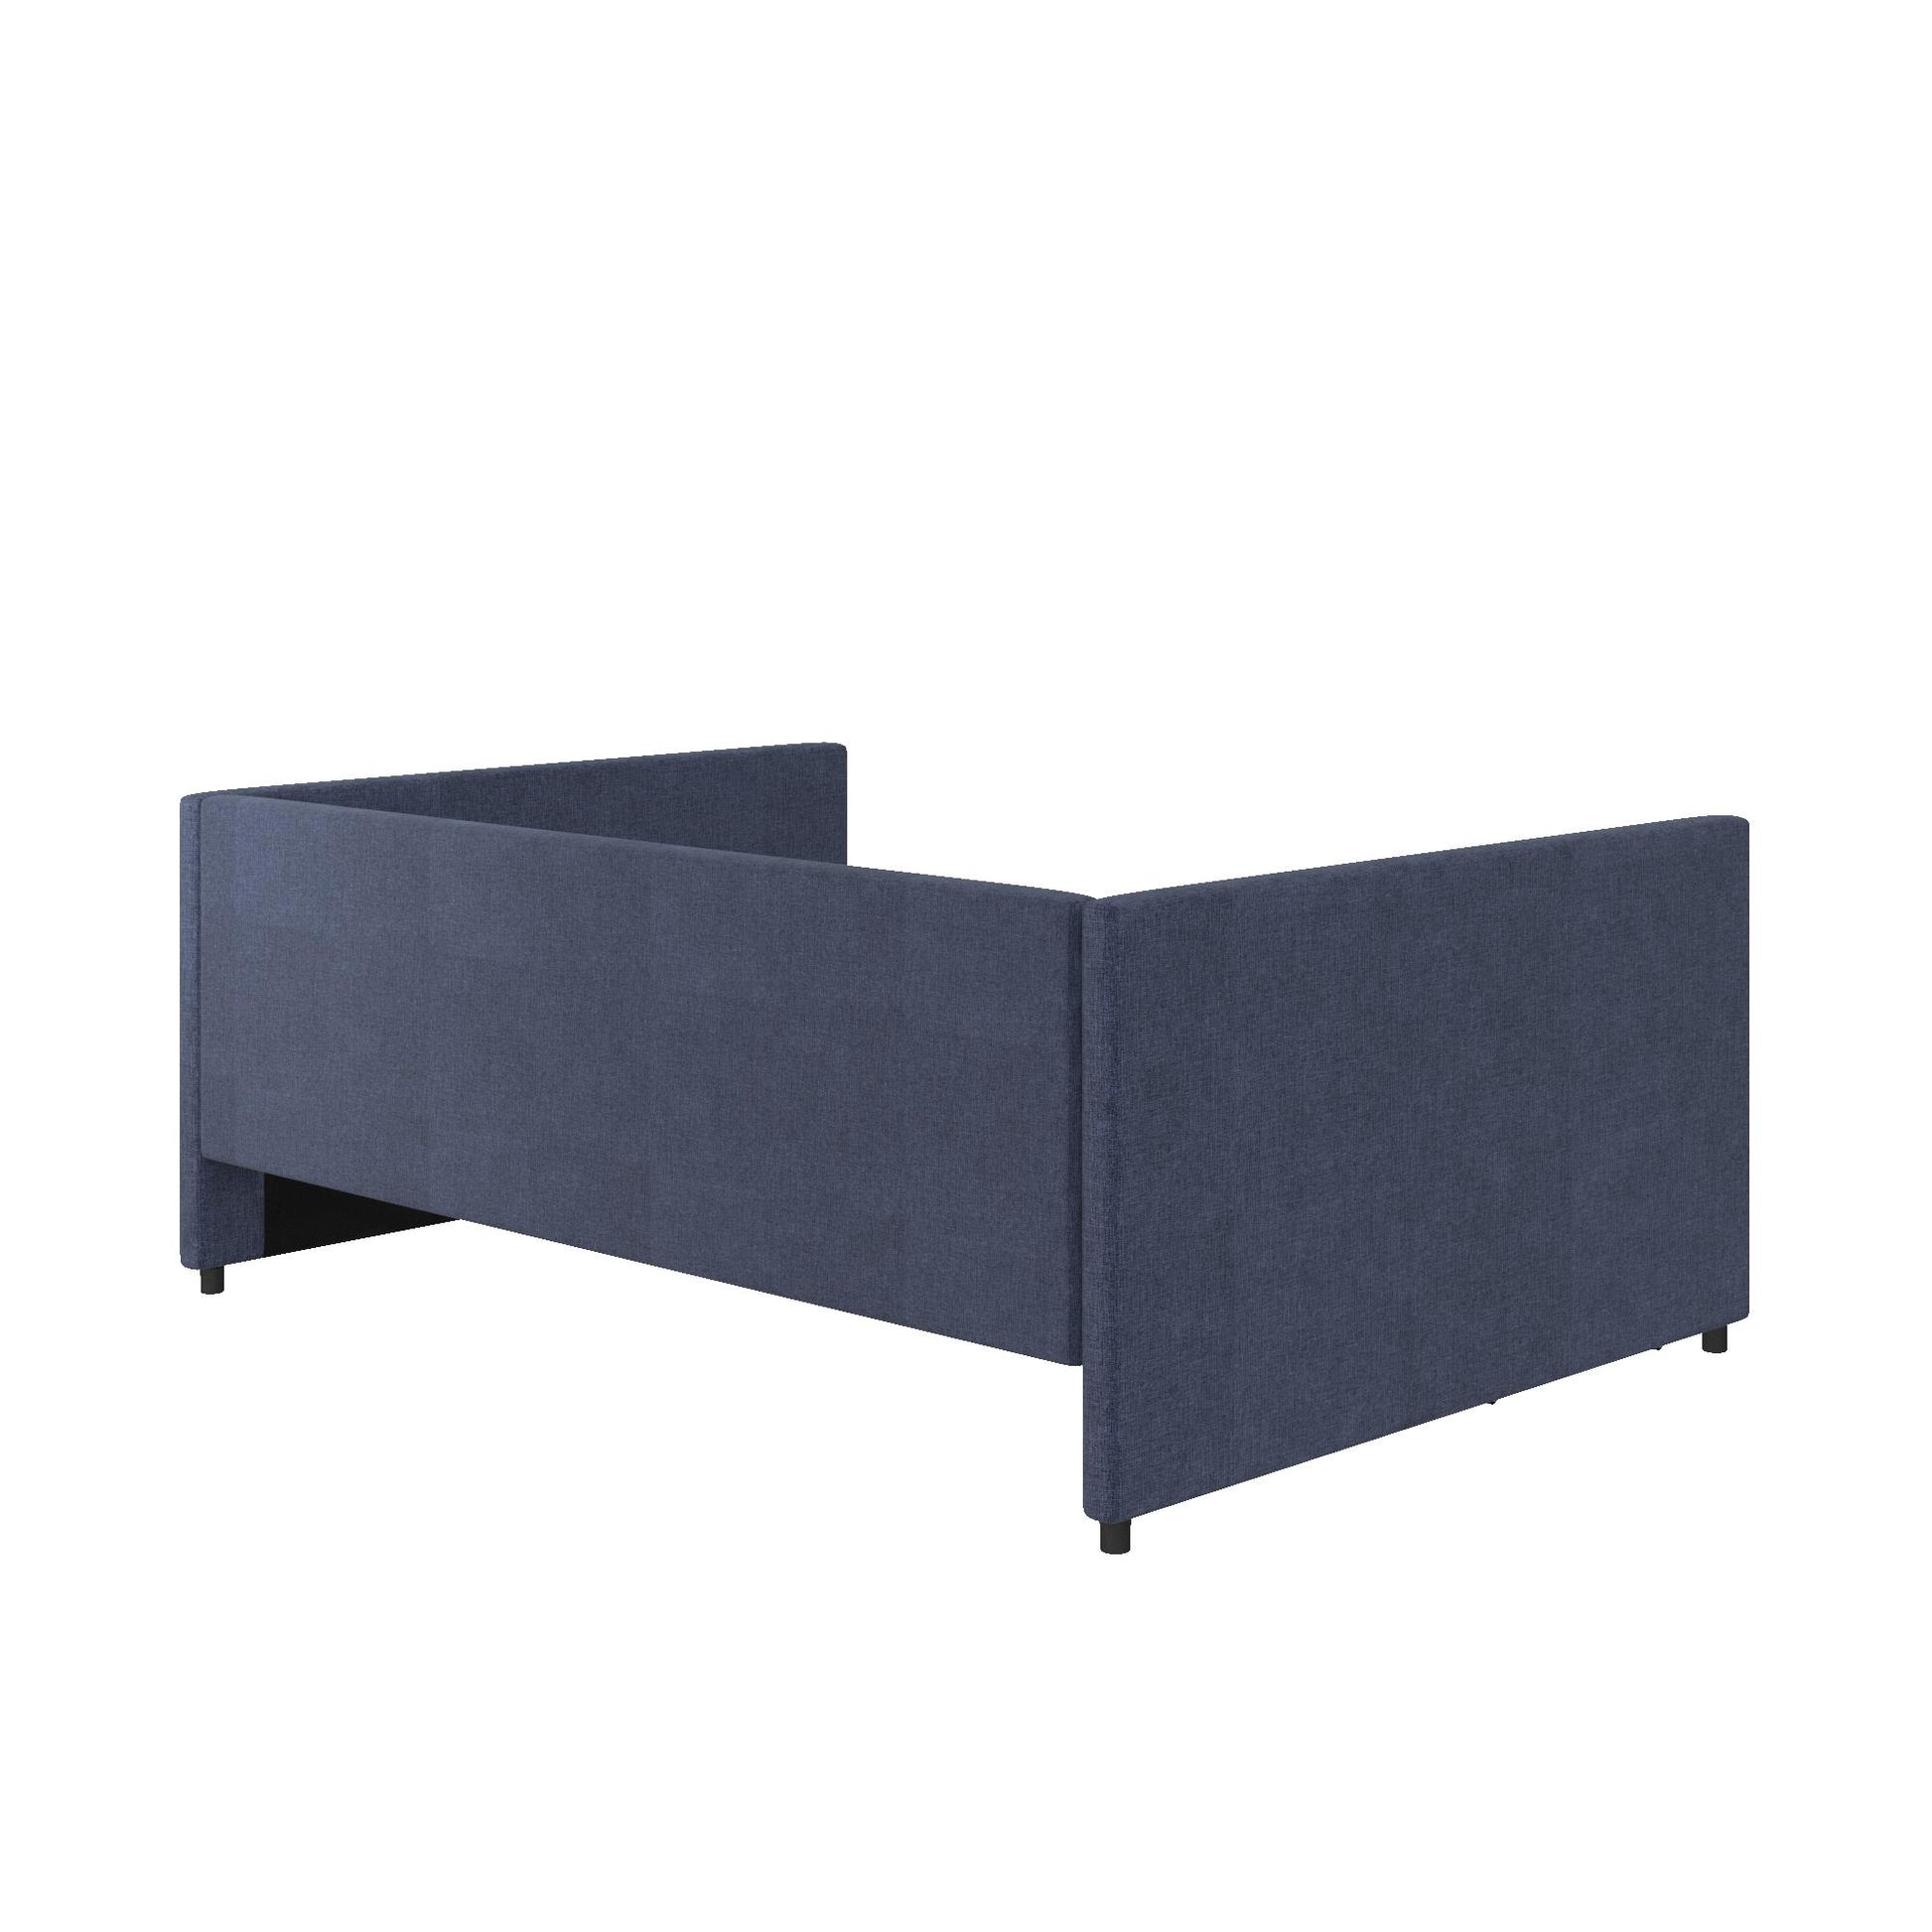 Daybed with Storage - Blue Linen - Full